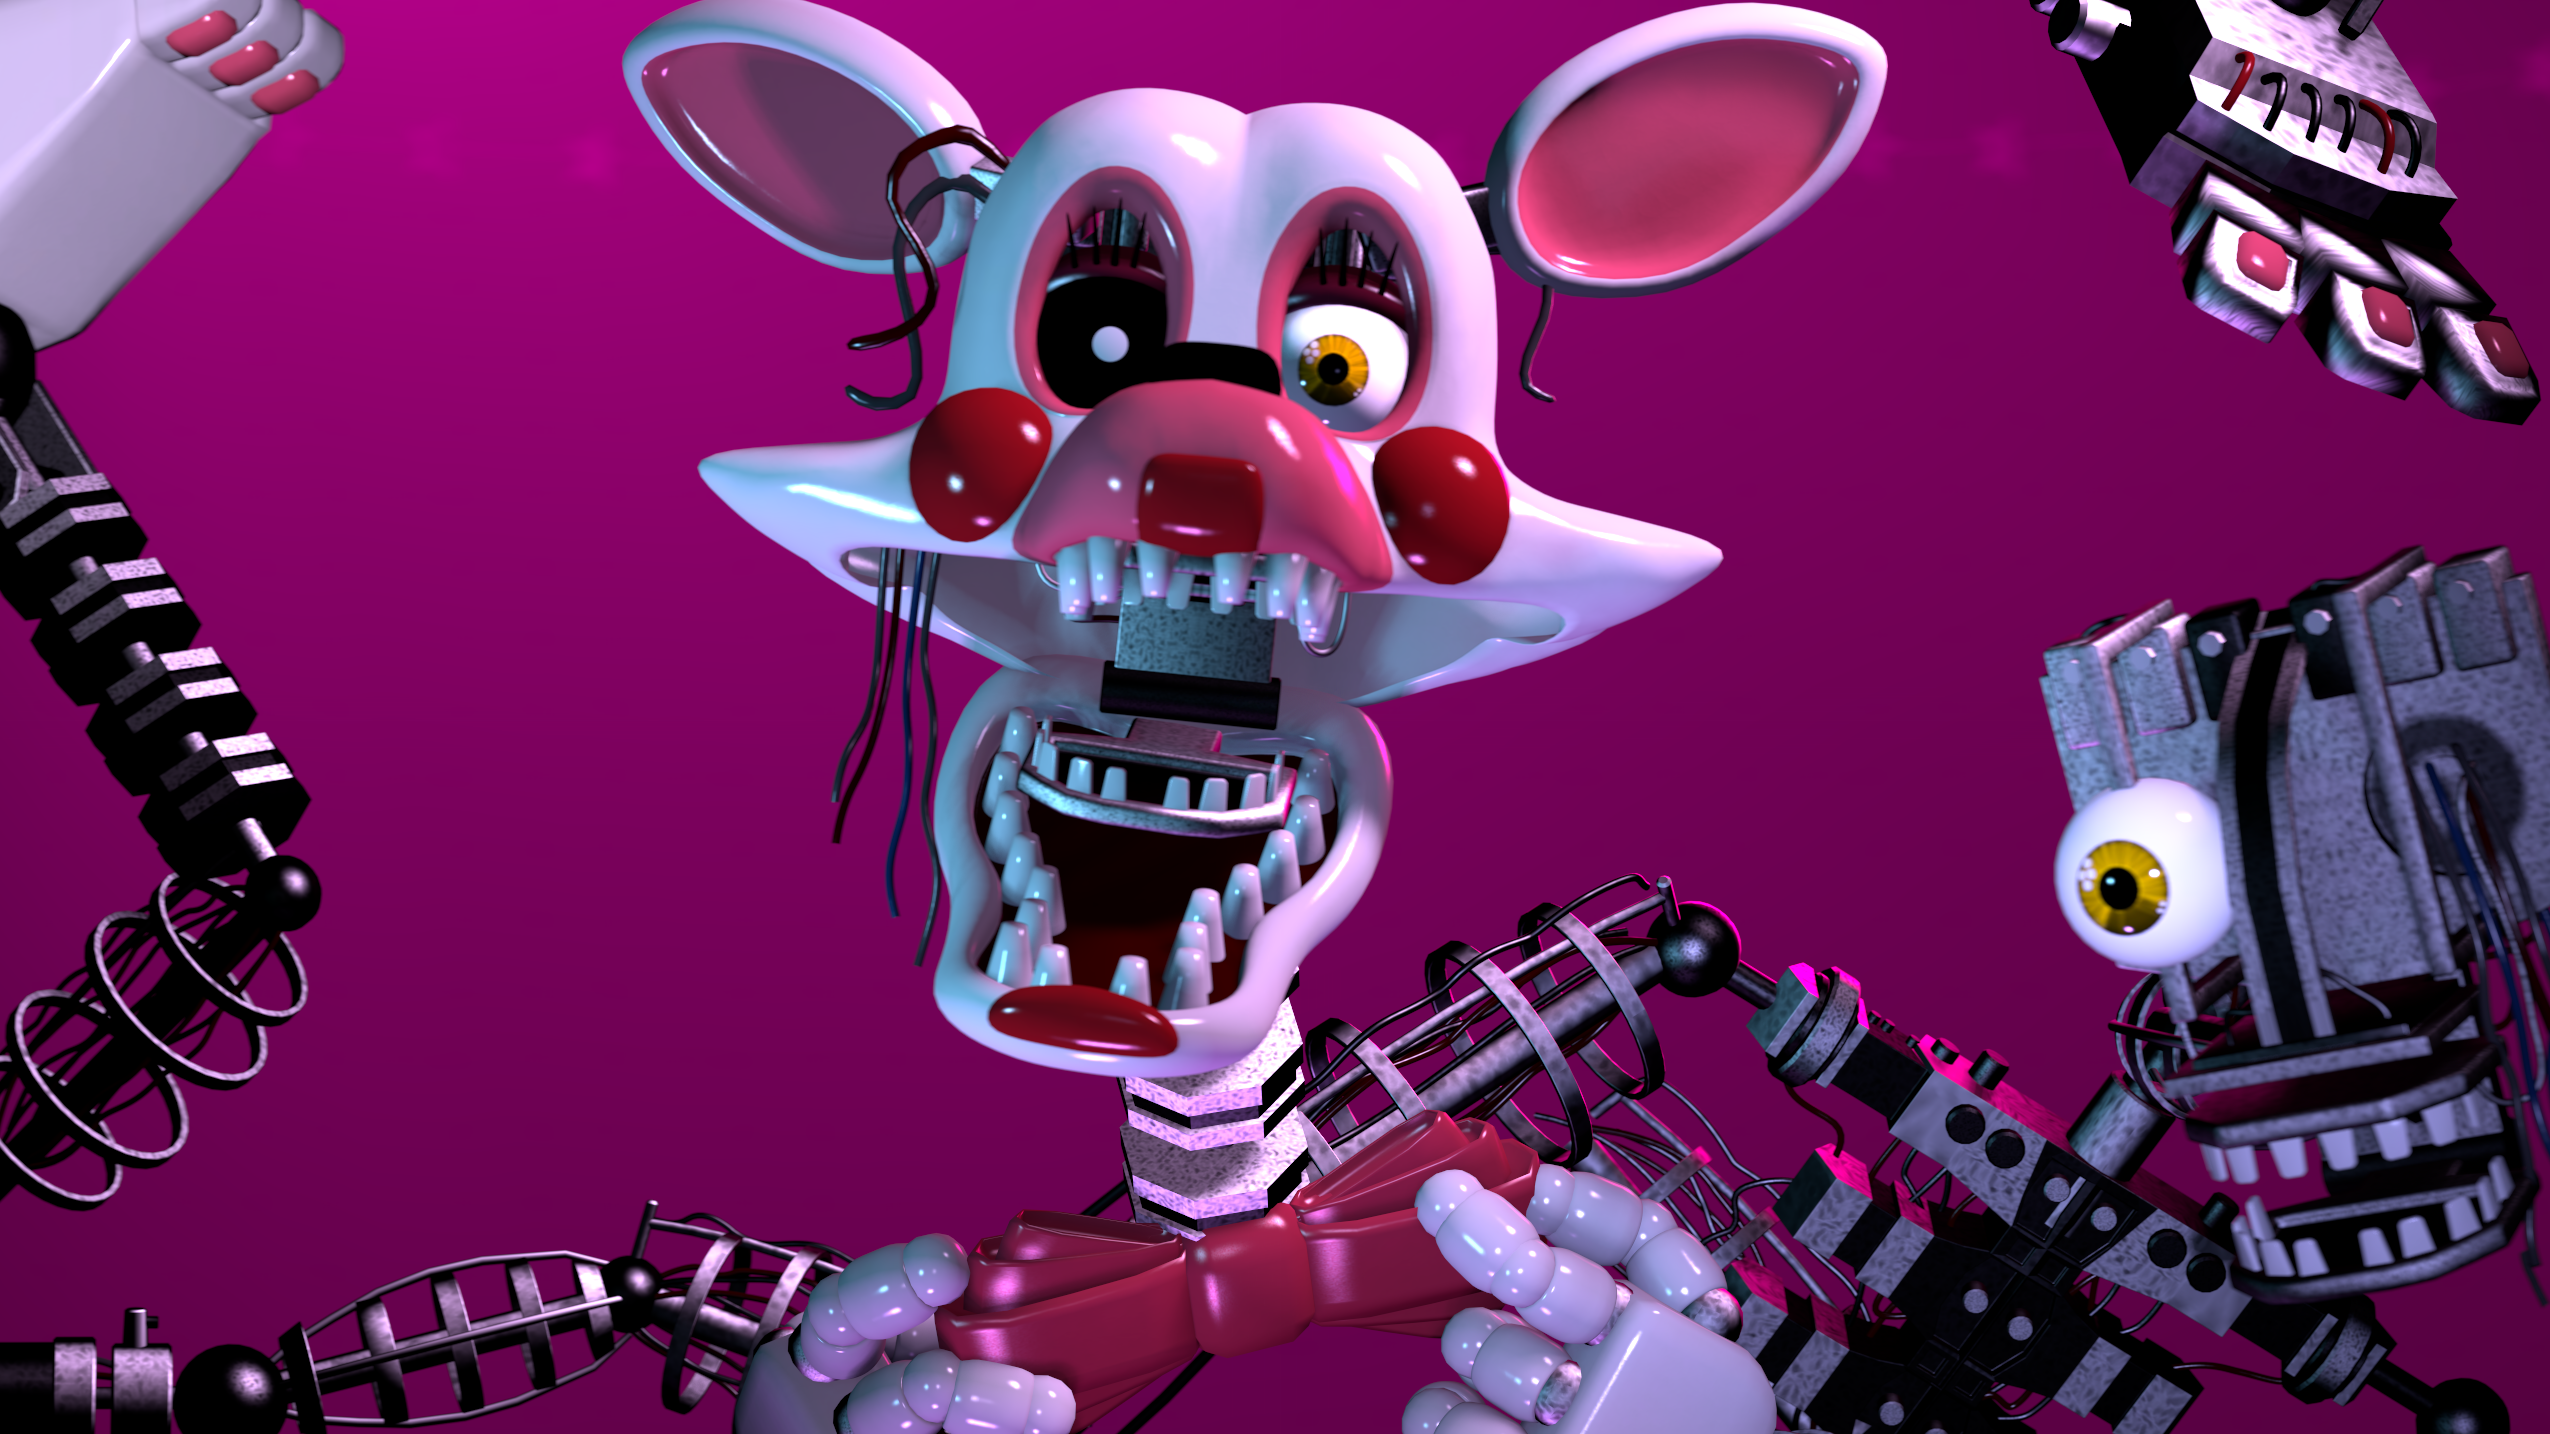 SFM FNAF) Withered Foxy Poster by MysticMCMFP on DeviantArt